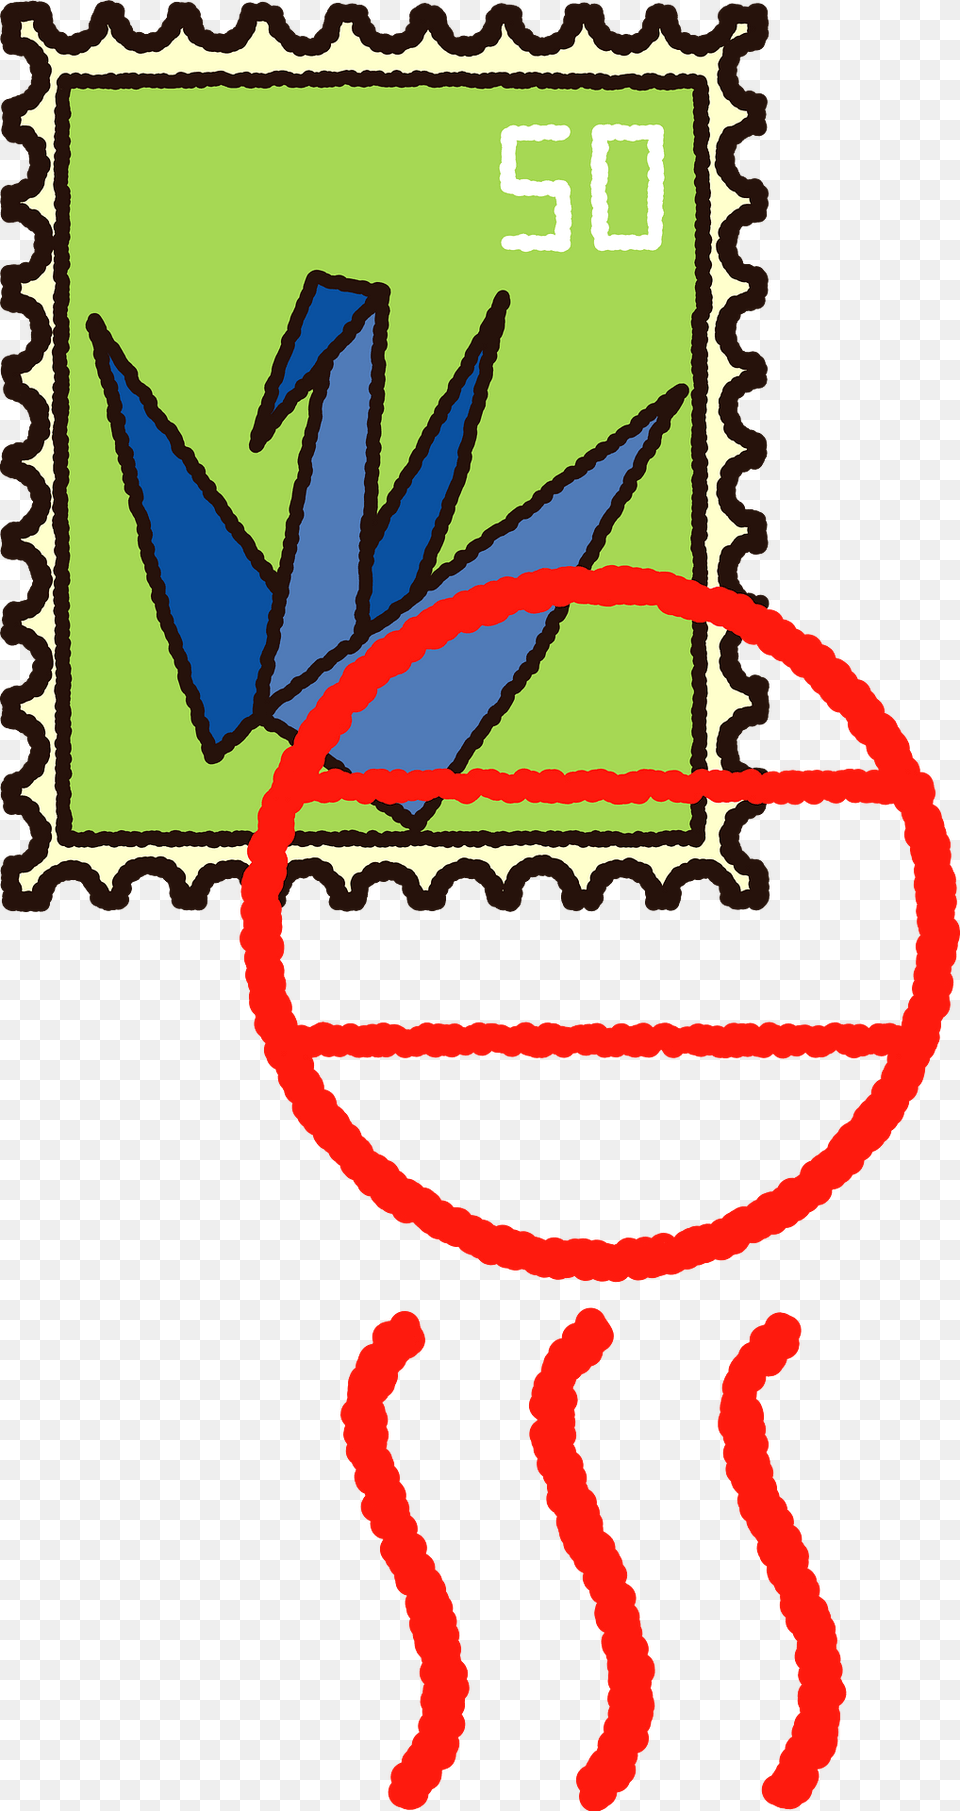 Postage Stamp With Cancellation Marking Clipart, Postage Stamp Png Image